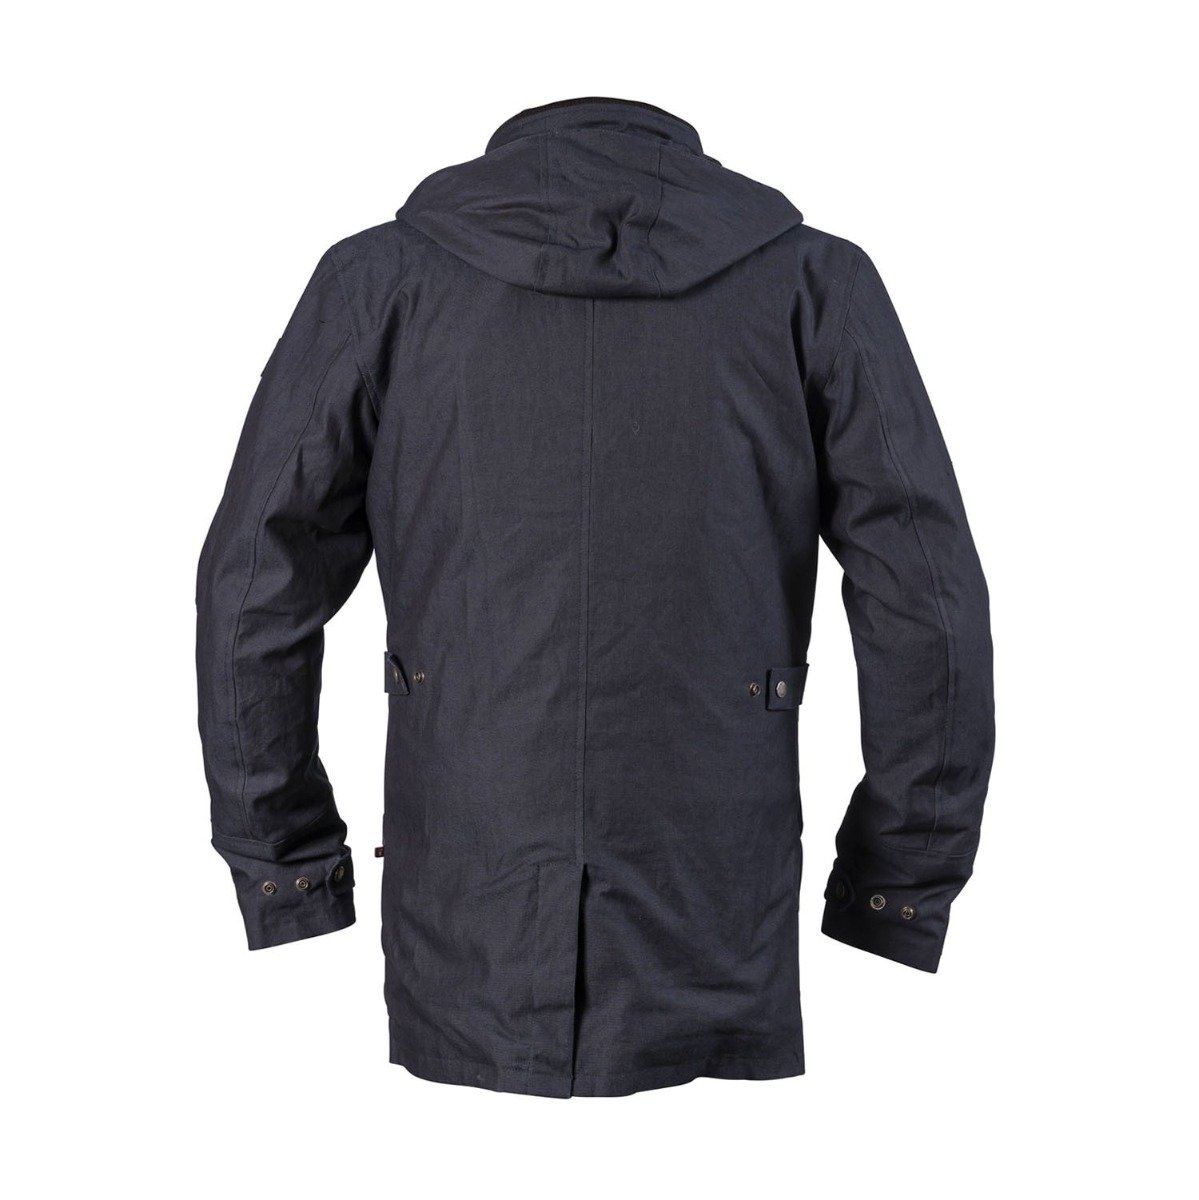 Image of Helstons Fall Tissu Technique Jacket Blue Size S ID 3662136079755